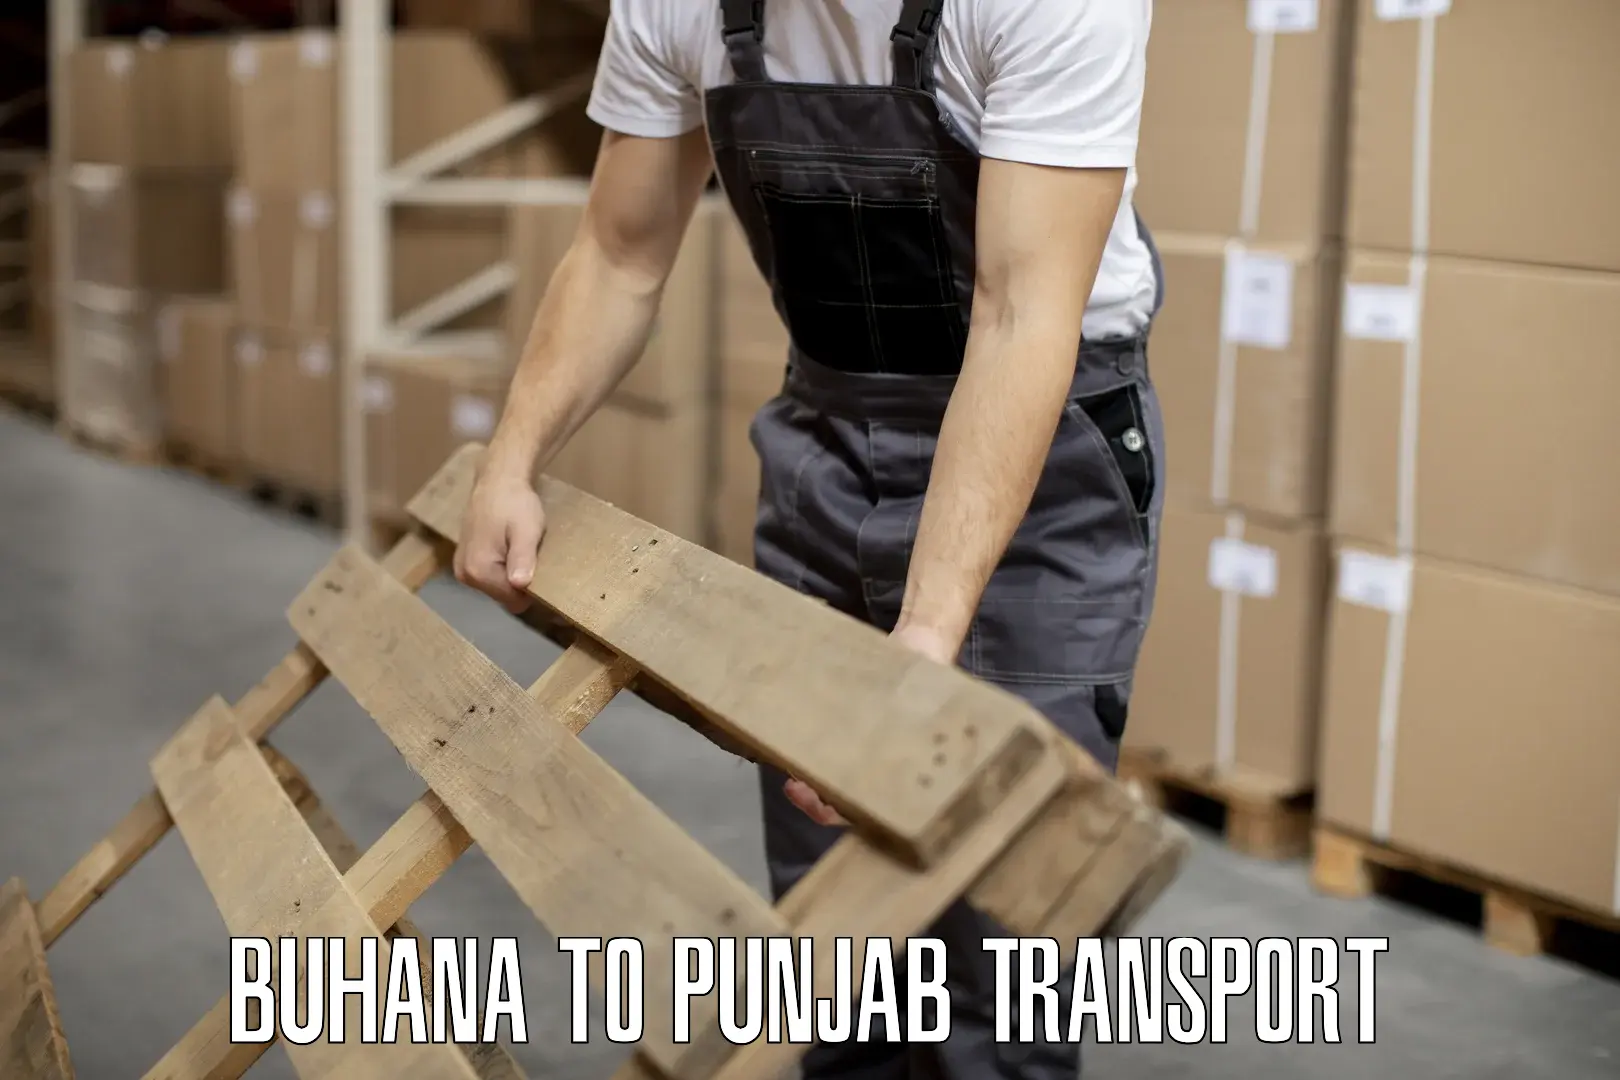 Road transport online services Buhana to Dhilwan